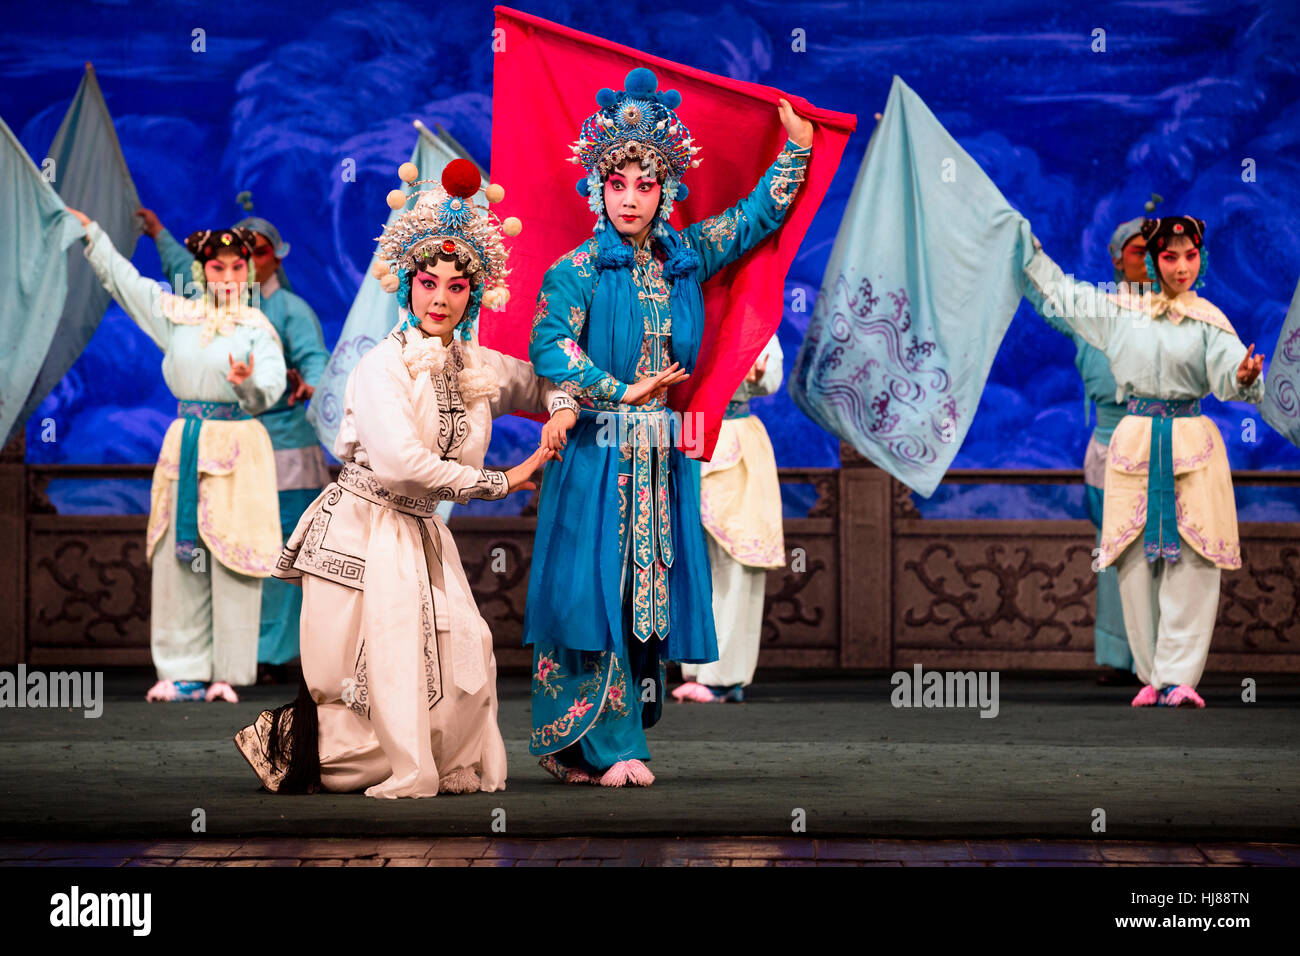 Actors of the Beijing Opera Troupe perform the famous story 'The Legend of the White Snake' at a stage in Moscow Stock Photo